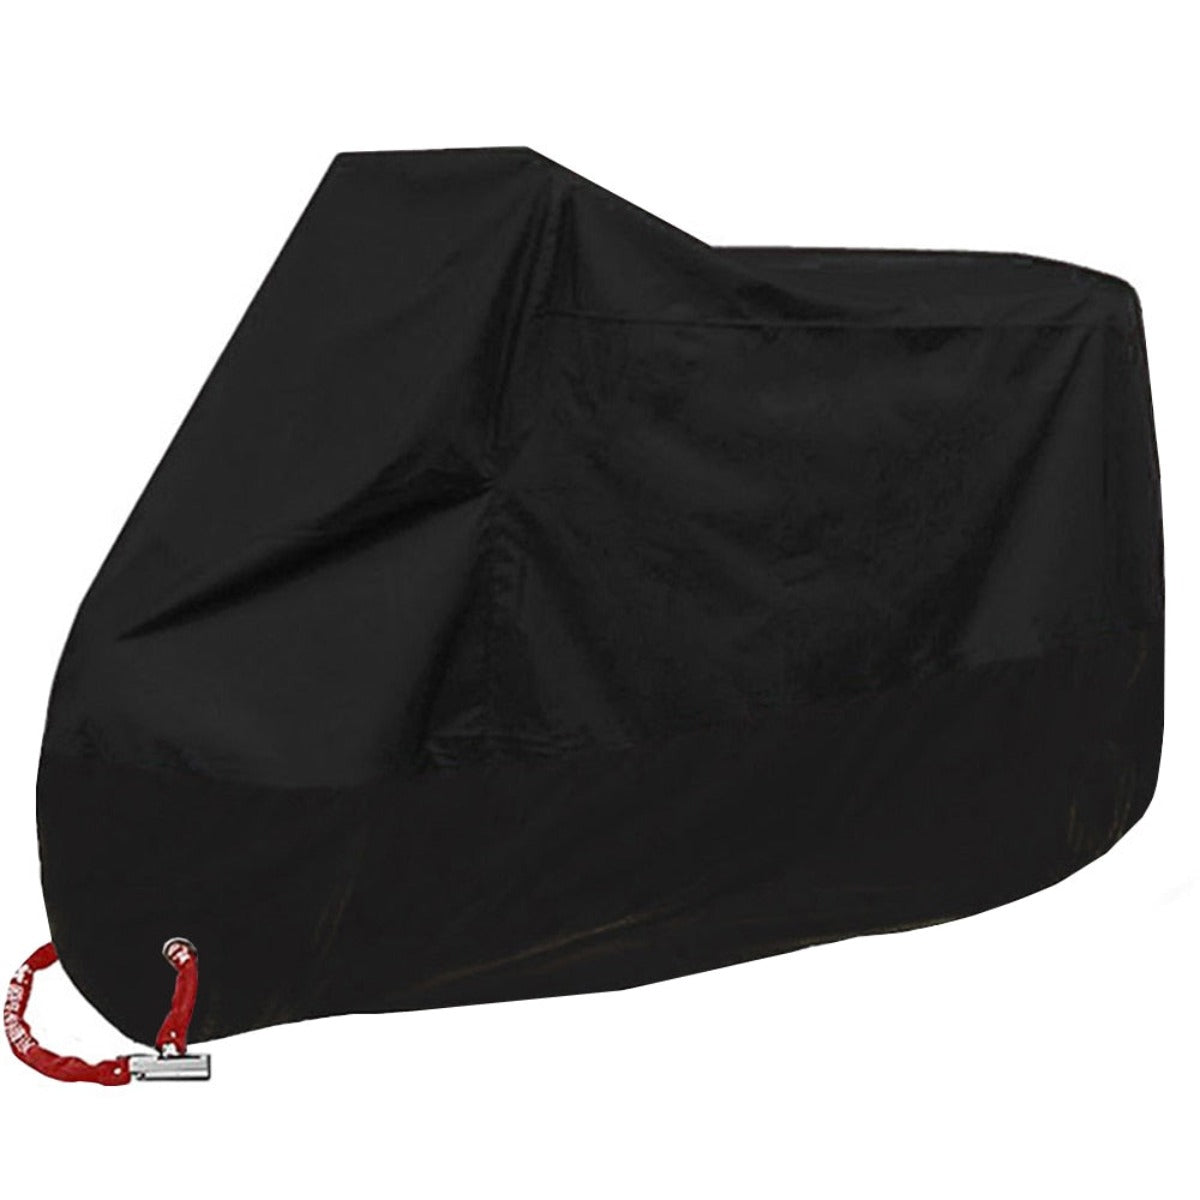 A black Waterproof Protective Motorcycle Cover protecting against weather damage on a white background.